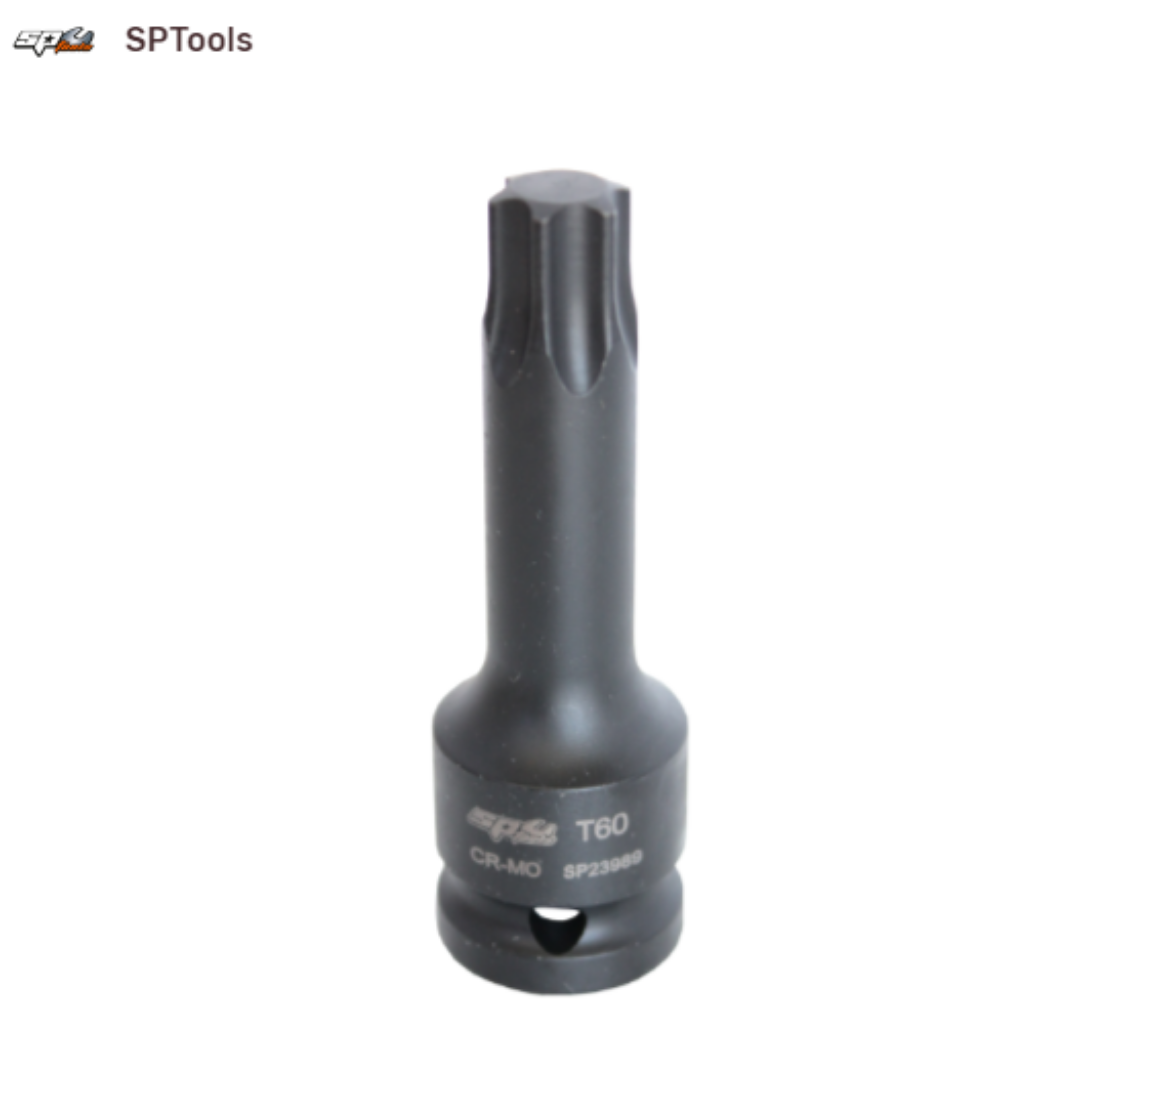 Picture of SOCKET IMPACT 1/2"DR TORX T20 SP TOOLS